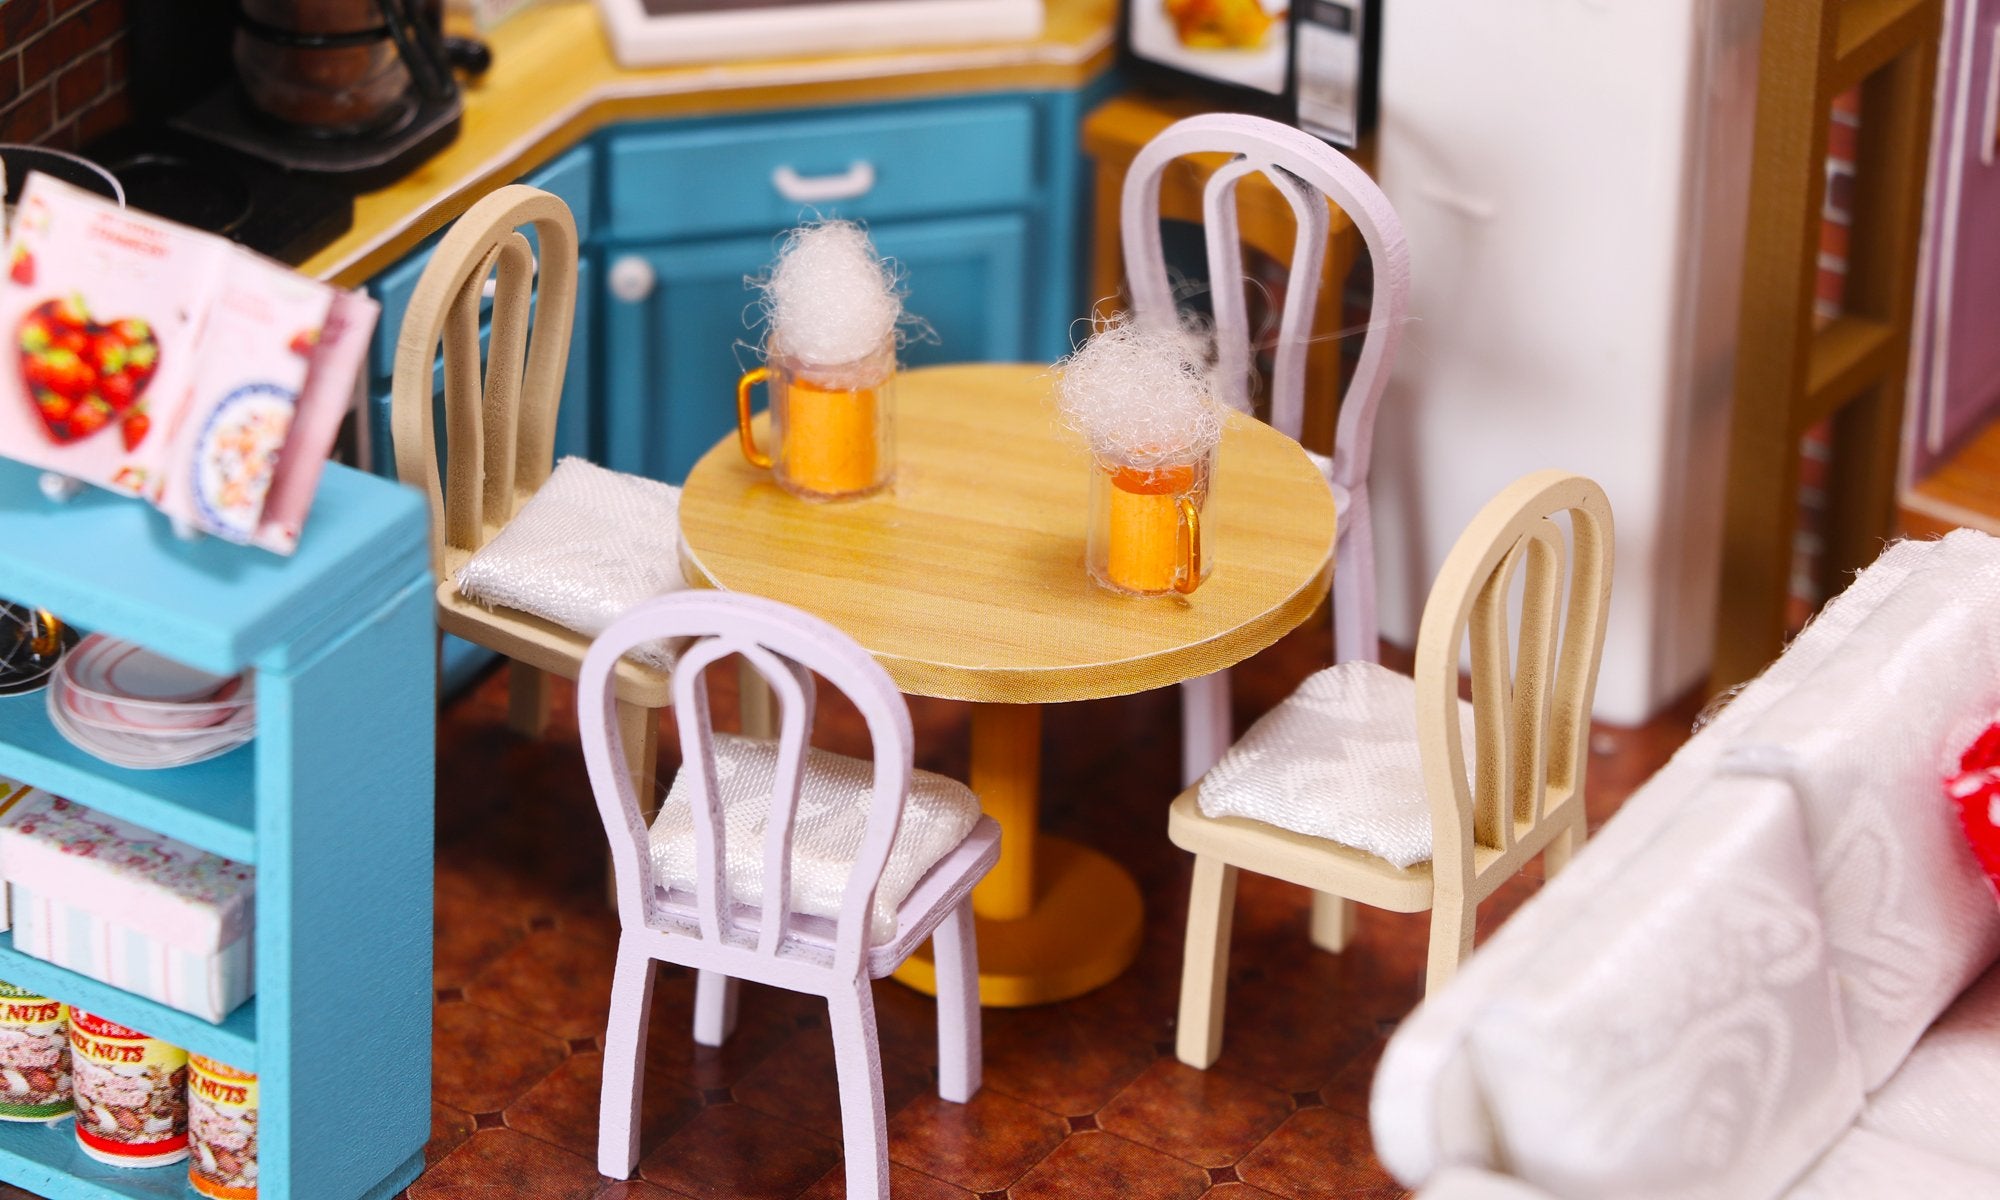 DIY Miniature Kitchen Room for Dollhouse